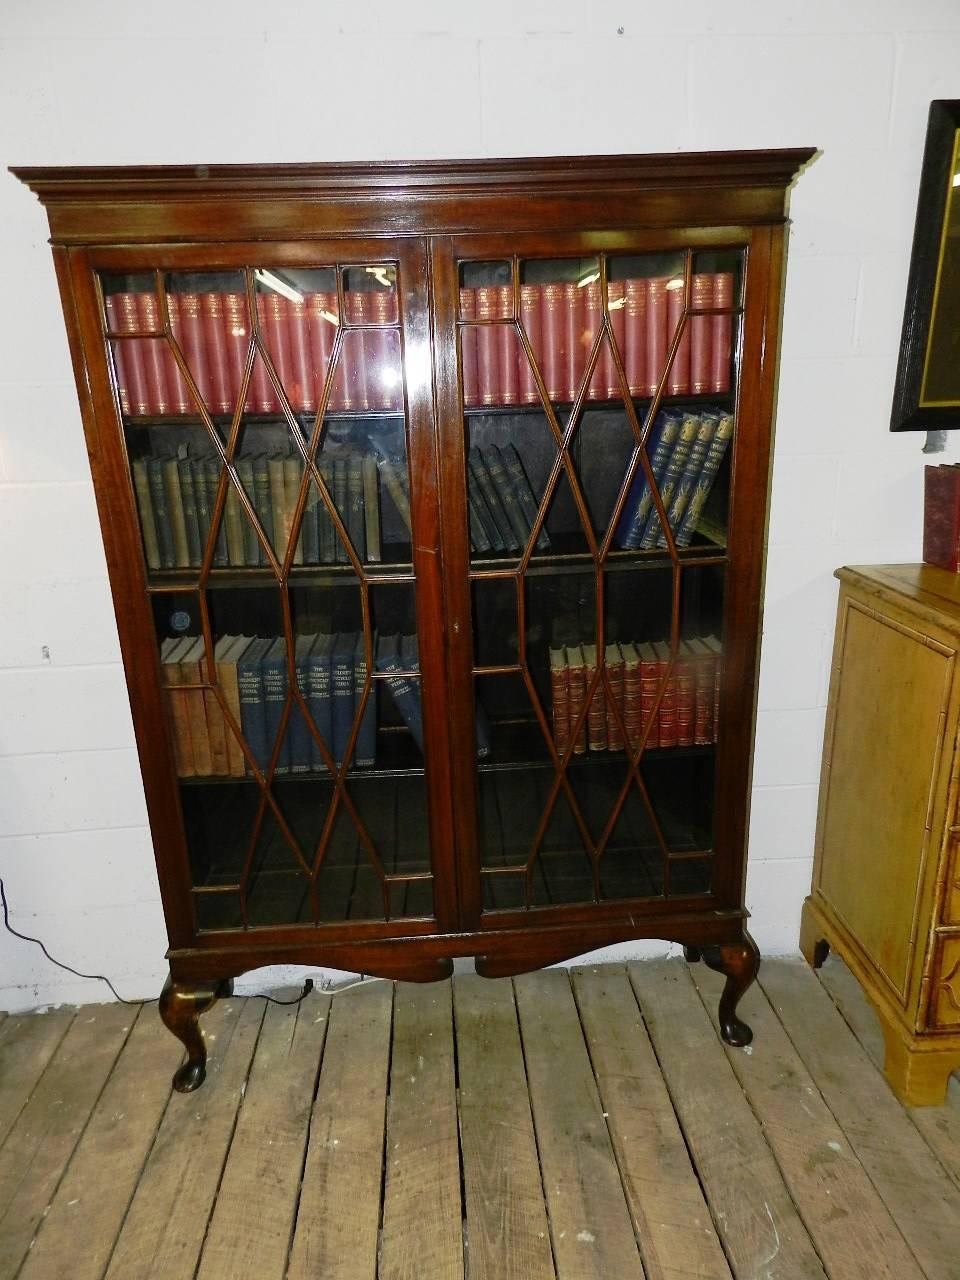 This is an English two-door astragal glazed bookcase on cabriole legs. Having three adjustable shelves, the piece is able to accommodate several sizes of books. A swept mahogany base adds a stylish accent to the bookcase.